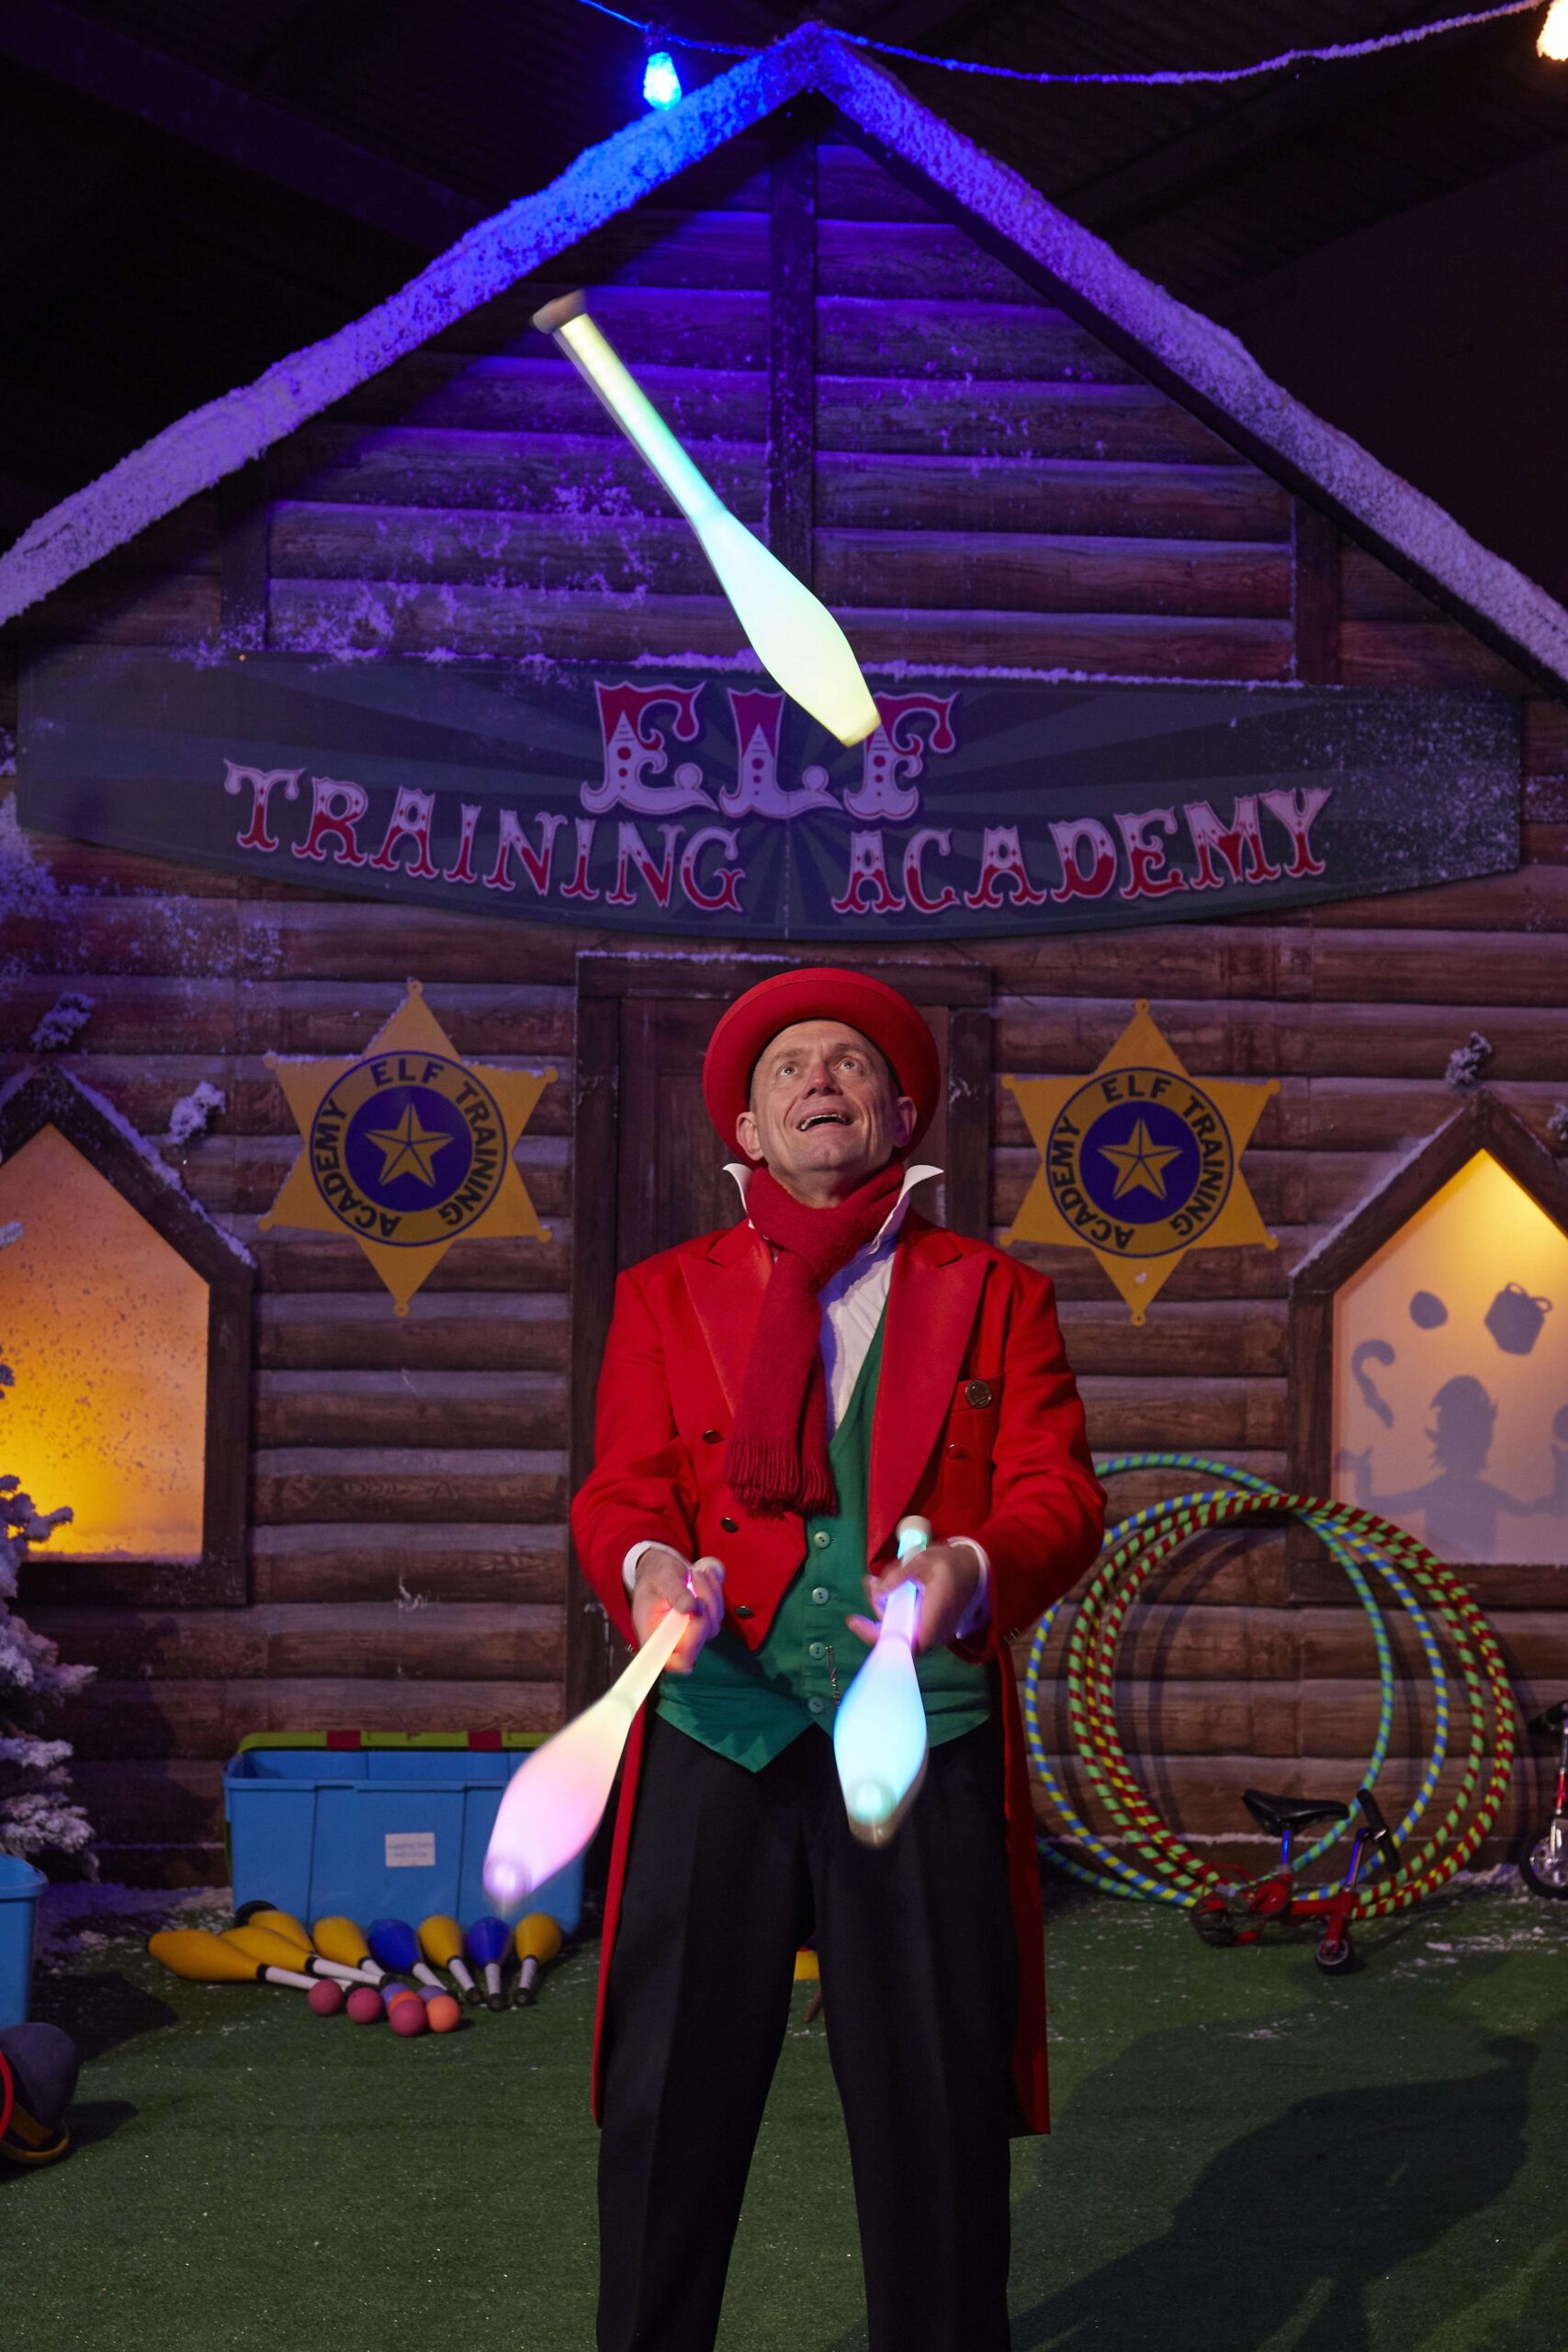 A juggler at a Christmas event